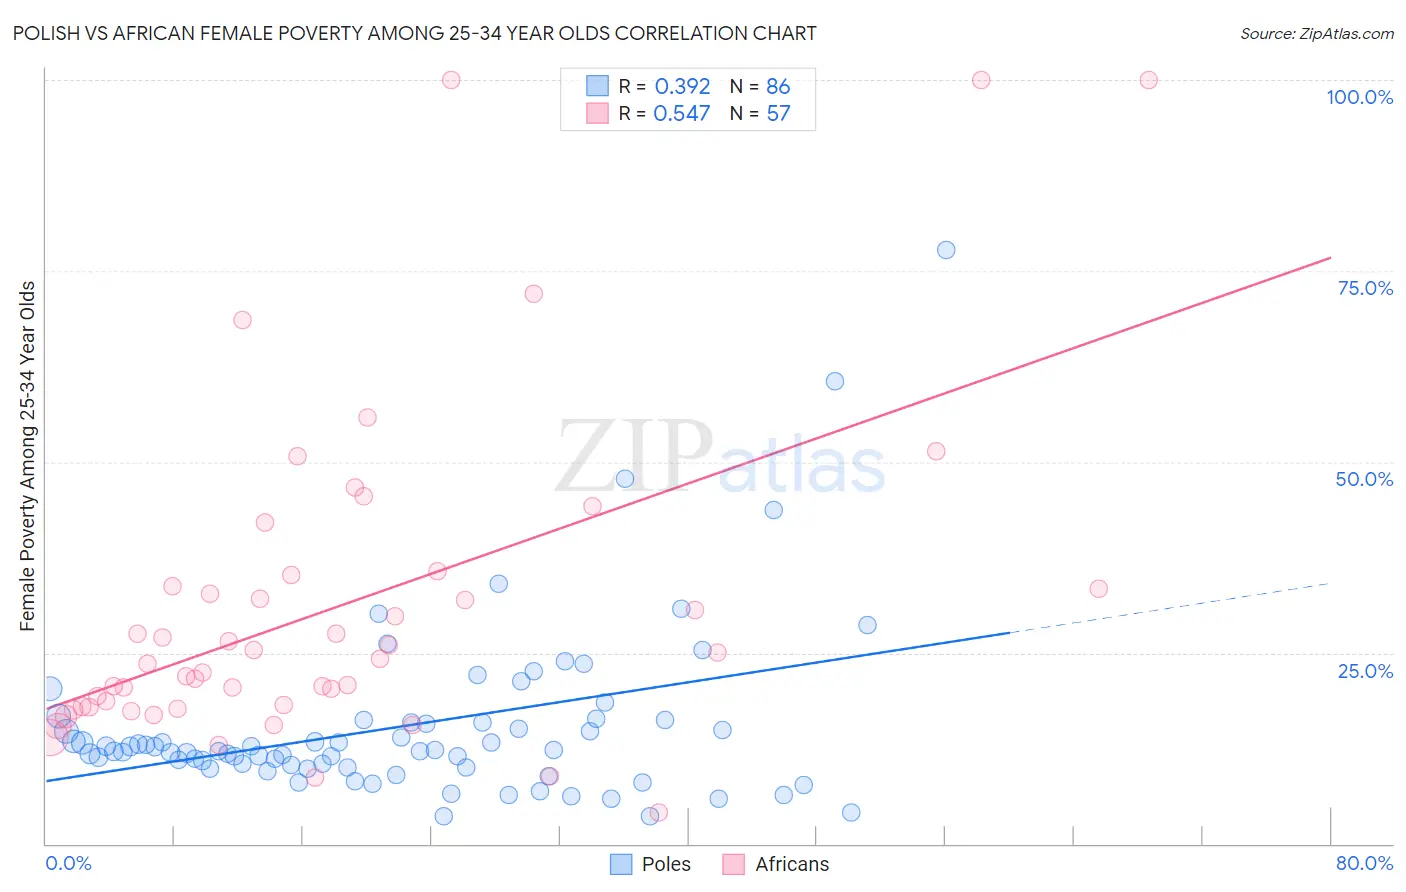 Polish vs African Female Poverty Among 25-34 Year Olds